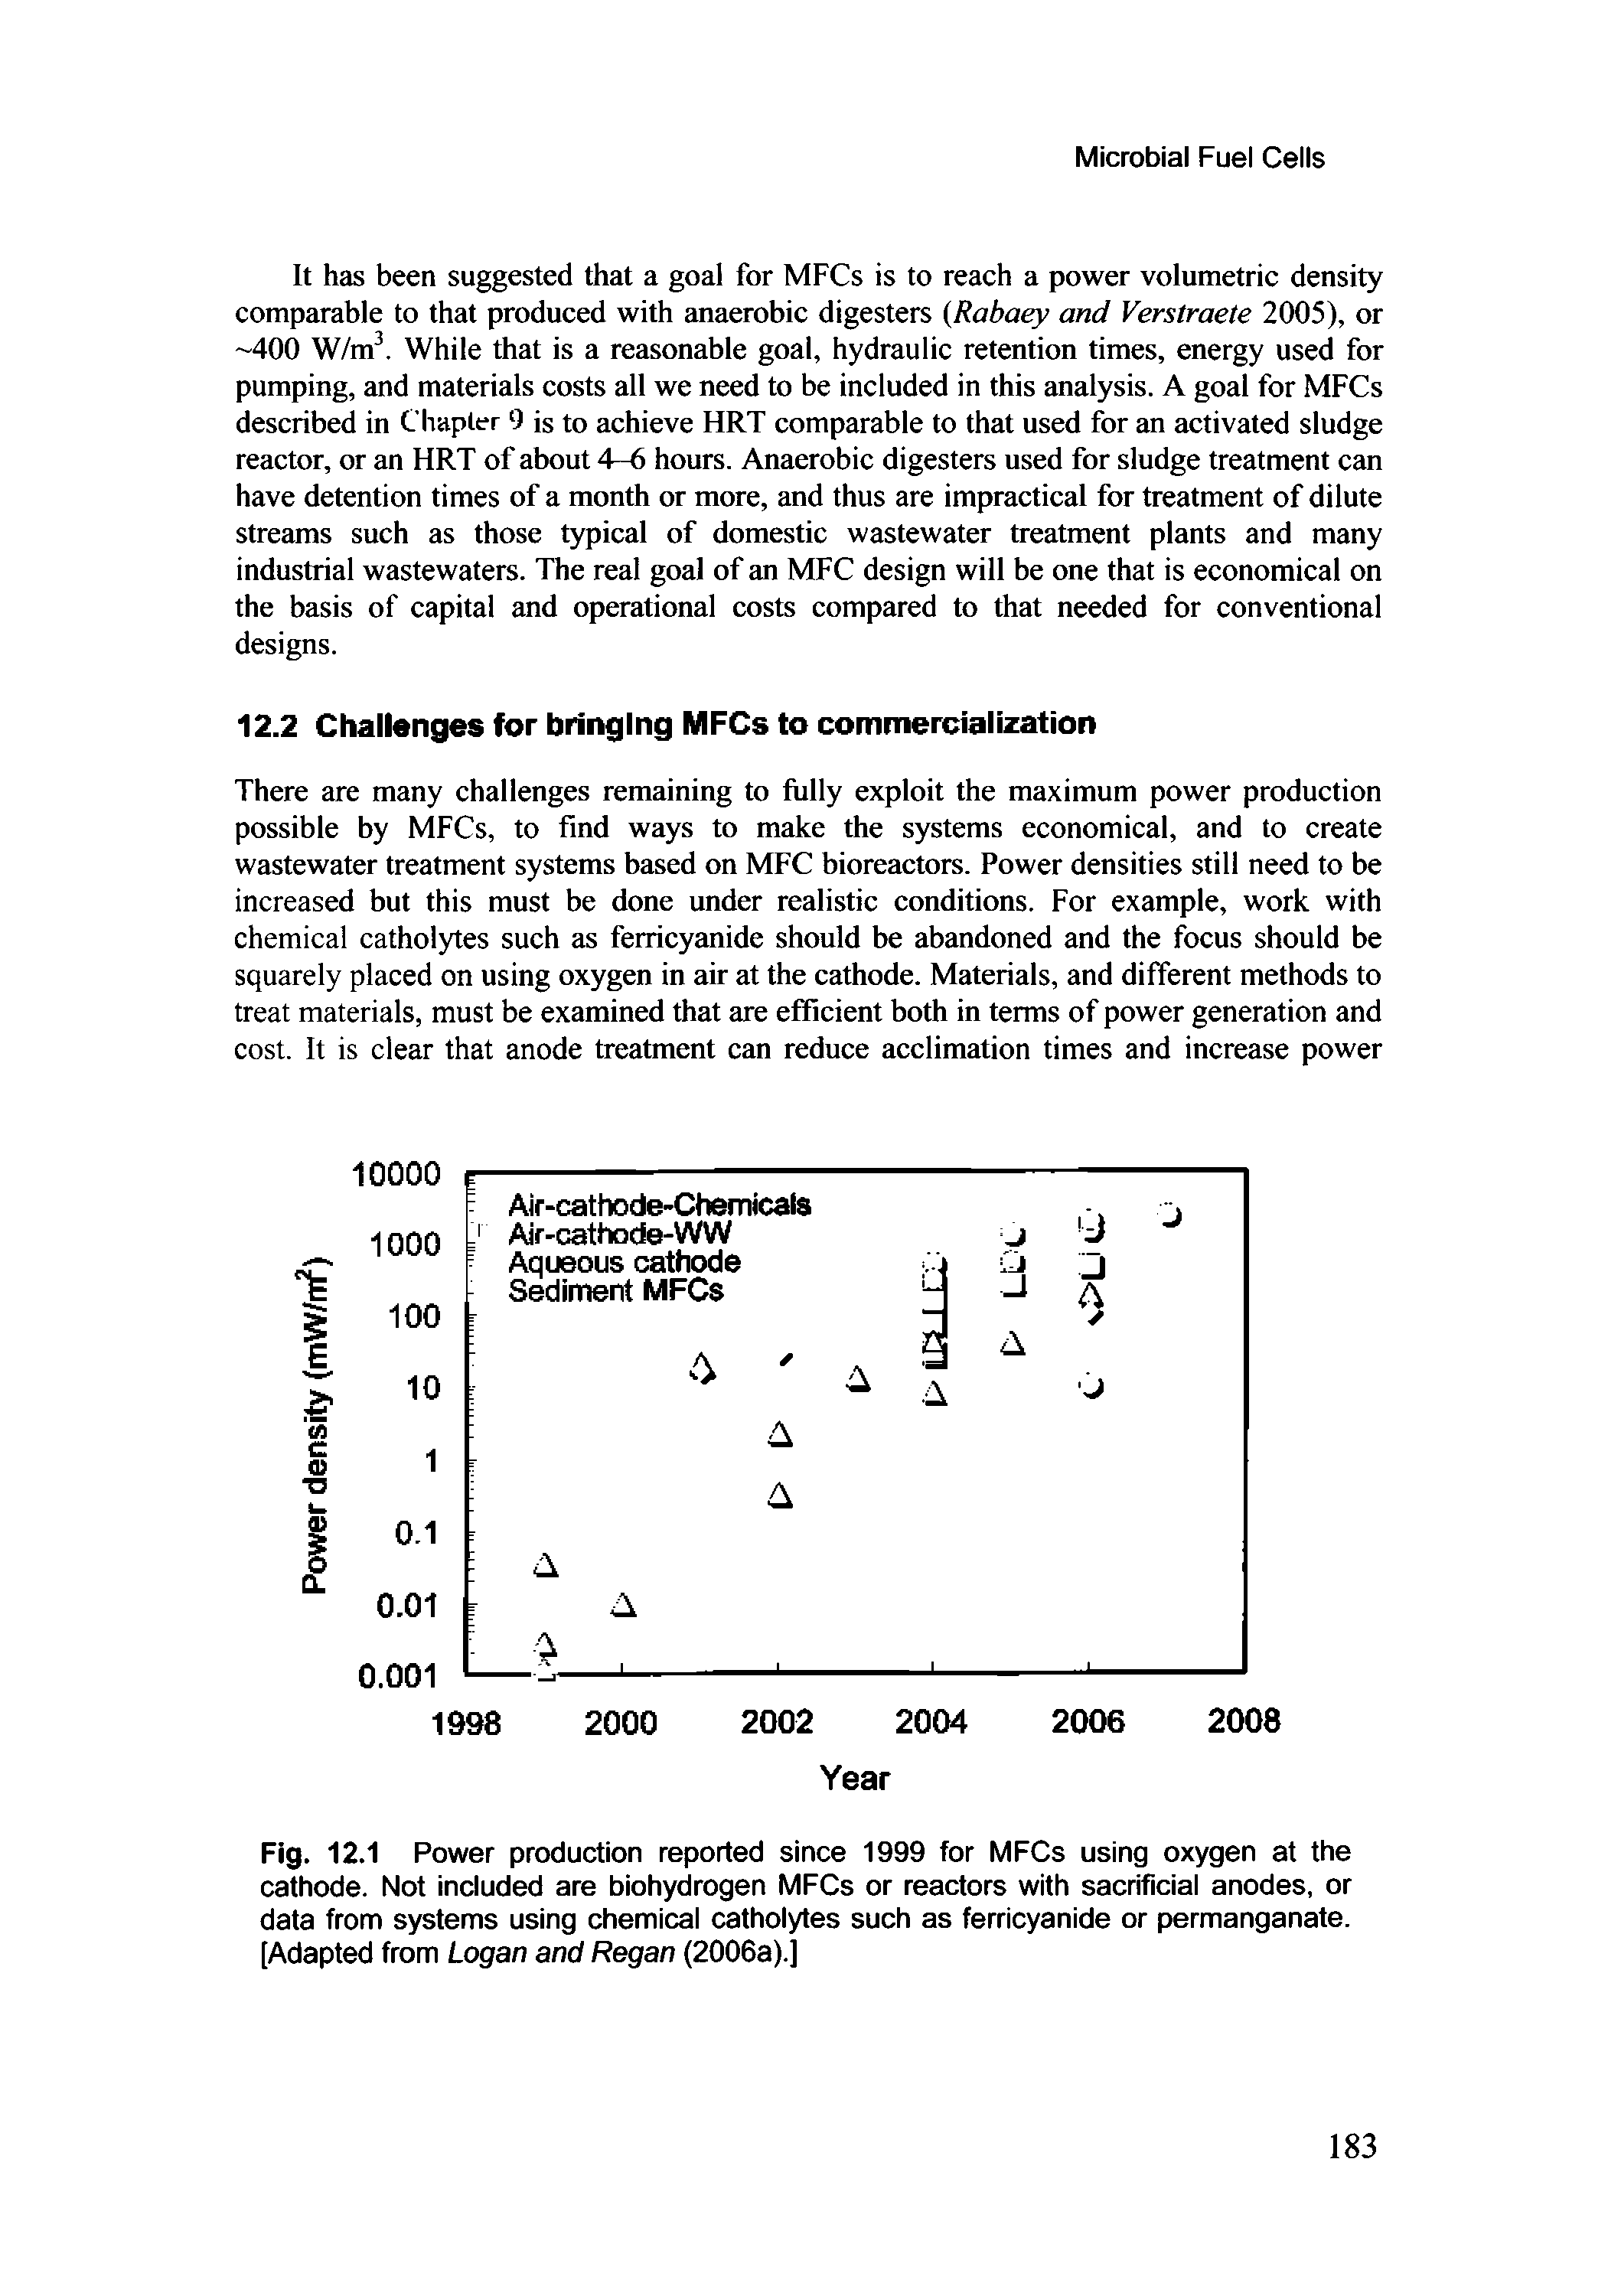 Fig. 12.1 Power production reported since 1999 for MFCs using oxygen at the cathode. Not included are biohydrogen MFCs or reactors with sacrificial anodes, or data from systems using chemical catholytes such as ferricyanide or permanganate. [Adapted from Logan and Regan (2006a).]...